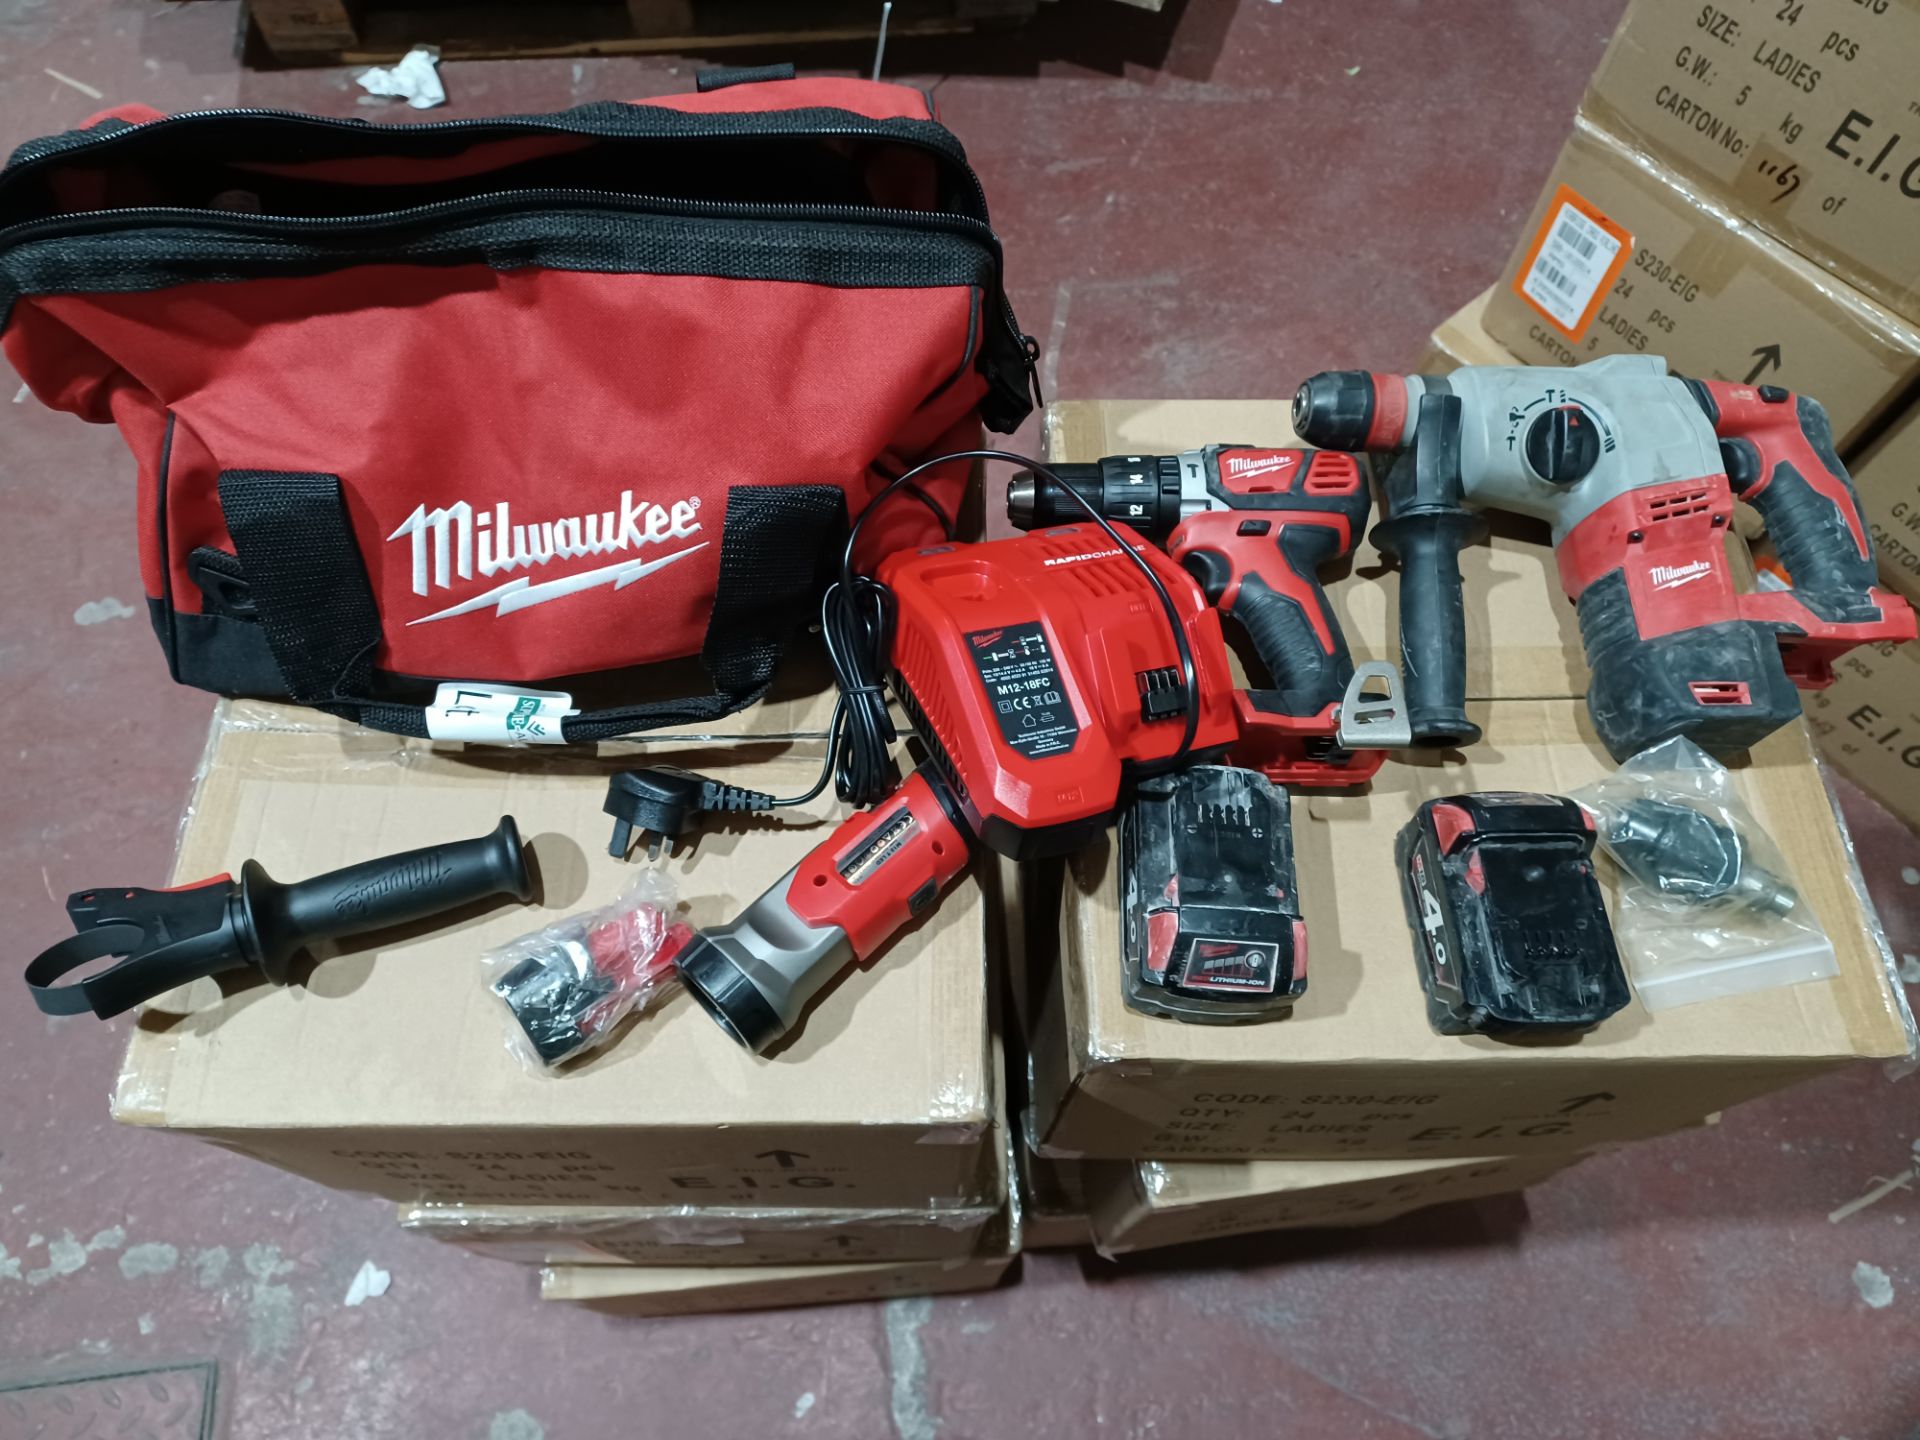 MILWAUKEE M18 TWIN PACK M18 BPD BRUSHLESS CORDLESS, HD18 HX SDS HAMMER DRILL AND TORCH WITH 3